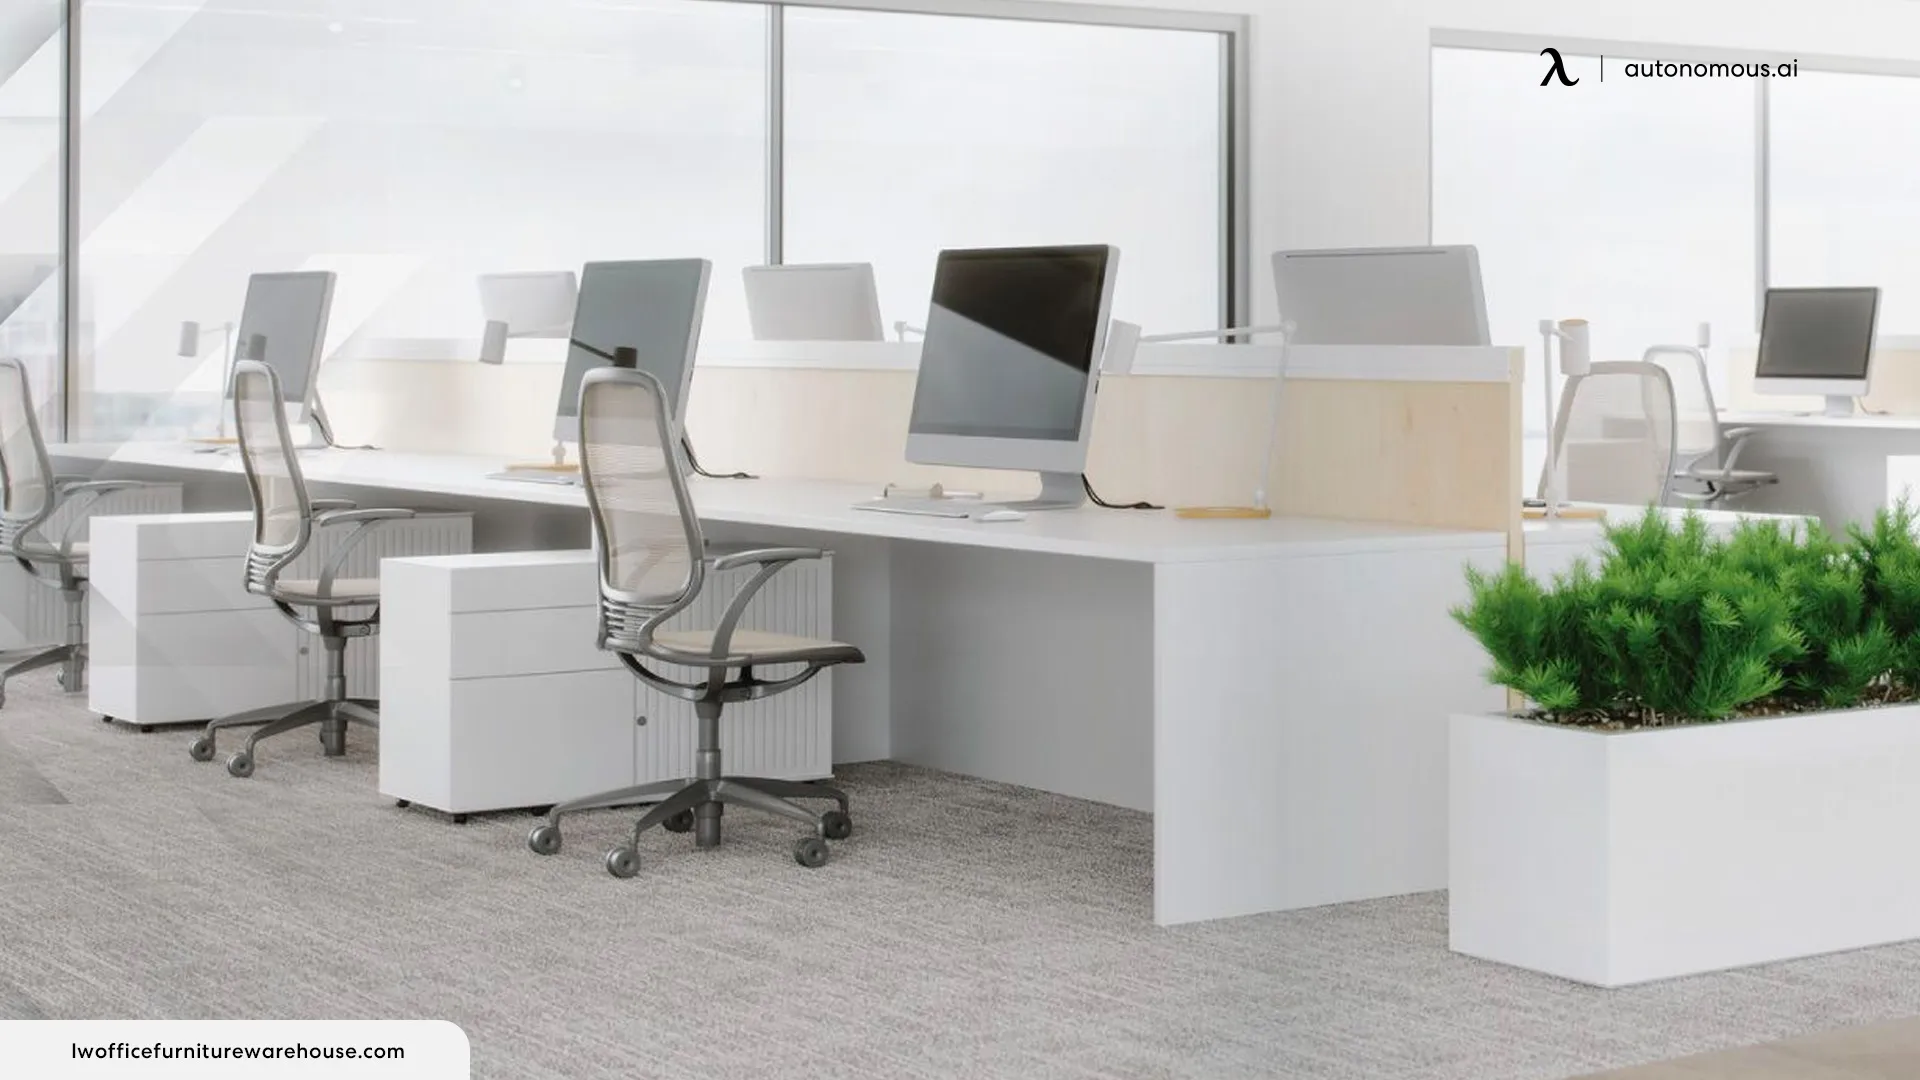 LW Office Furniture Warehouse